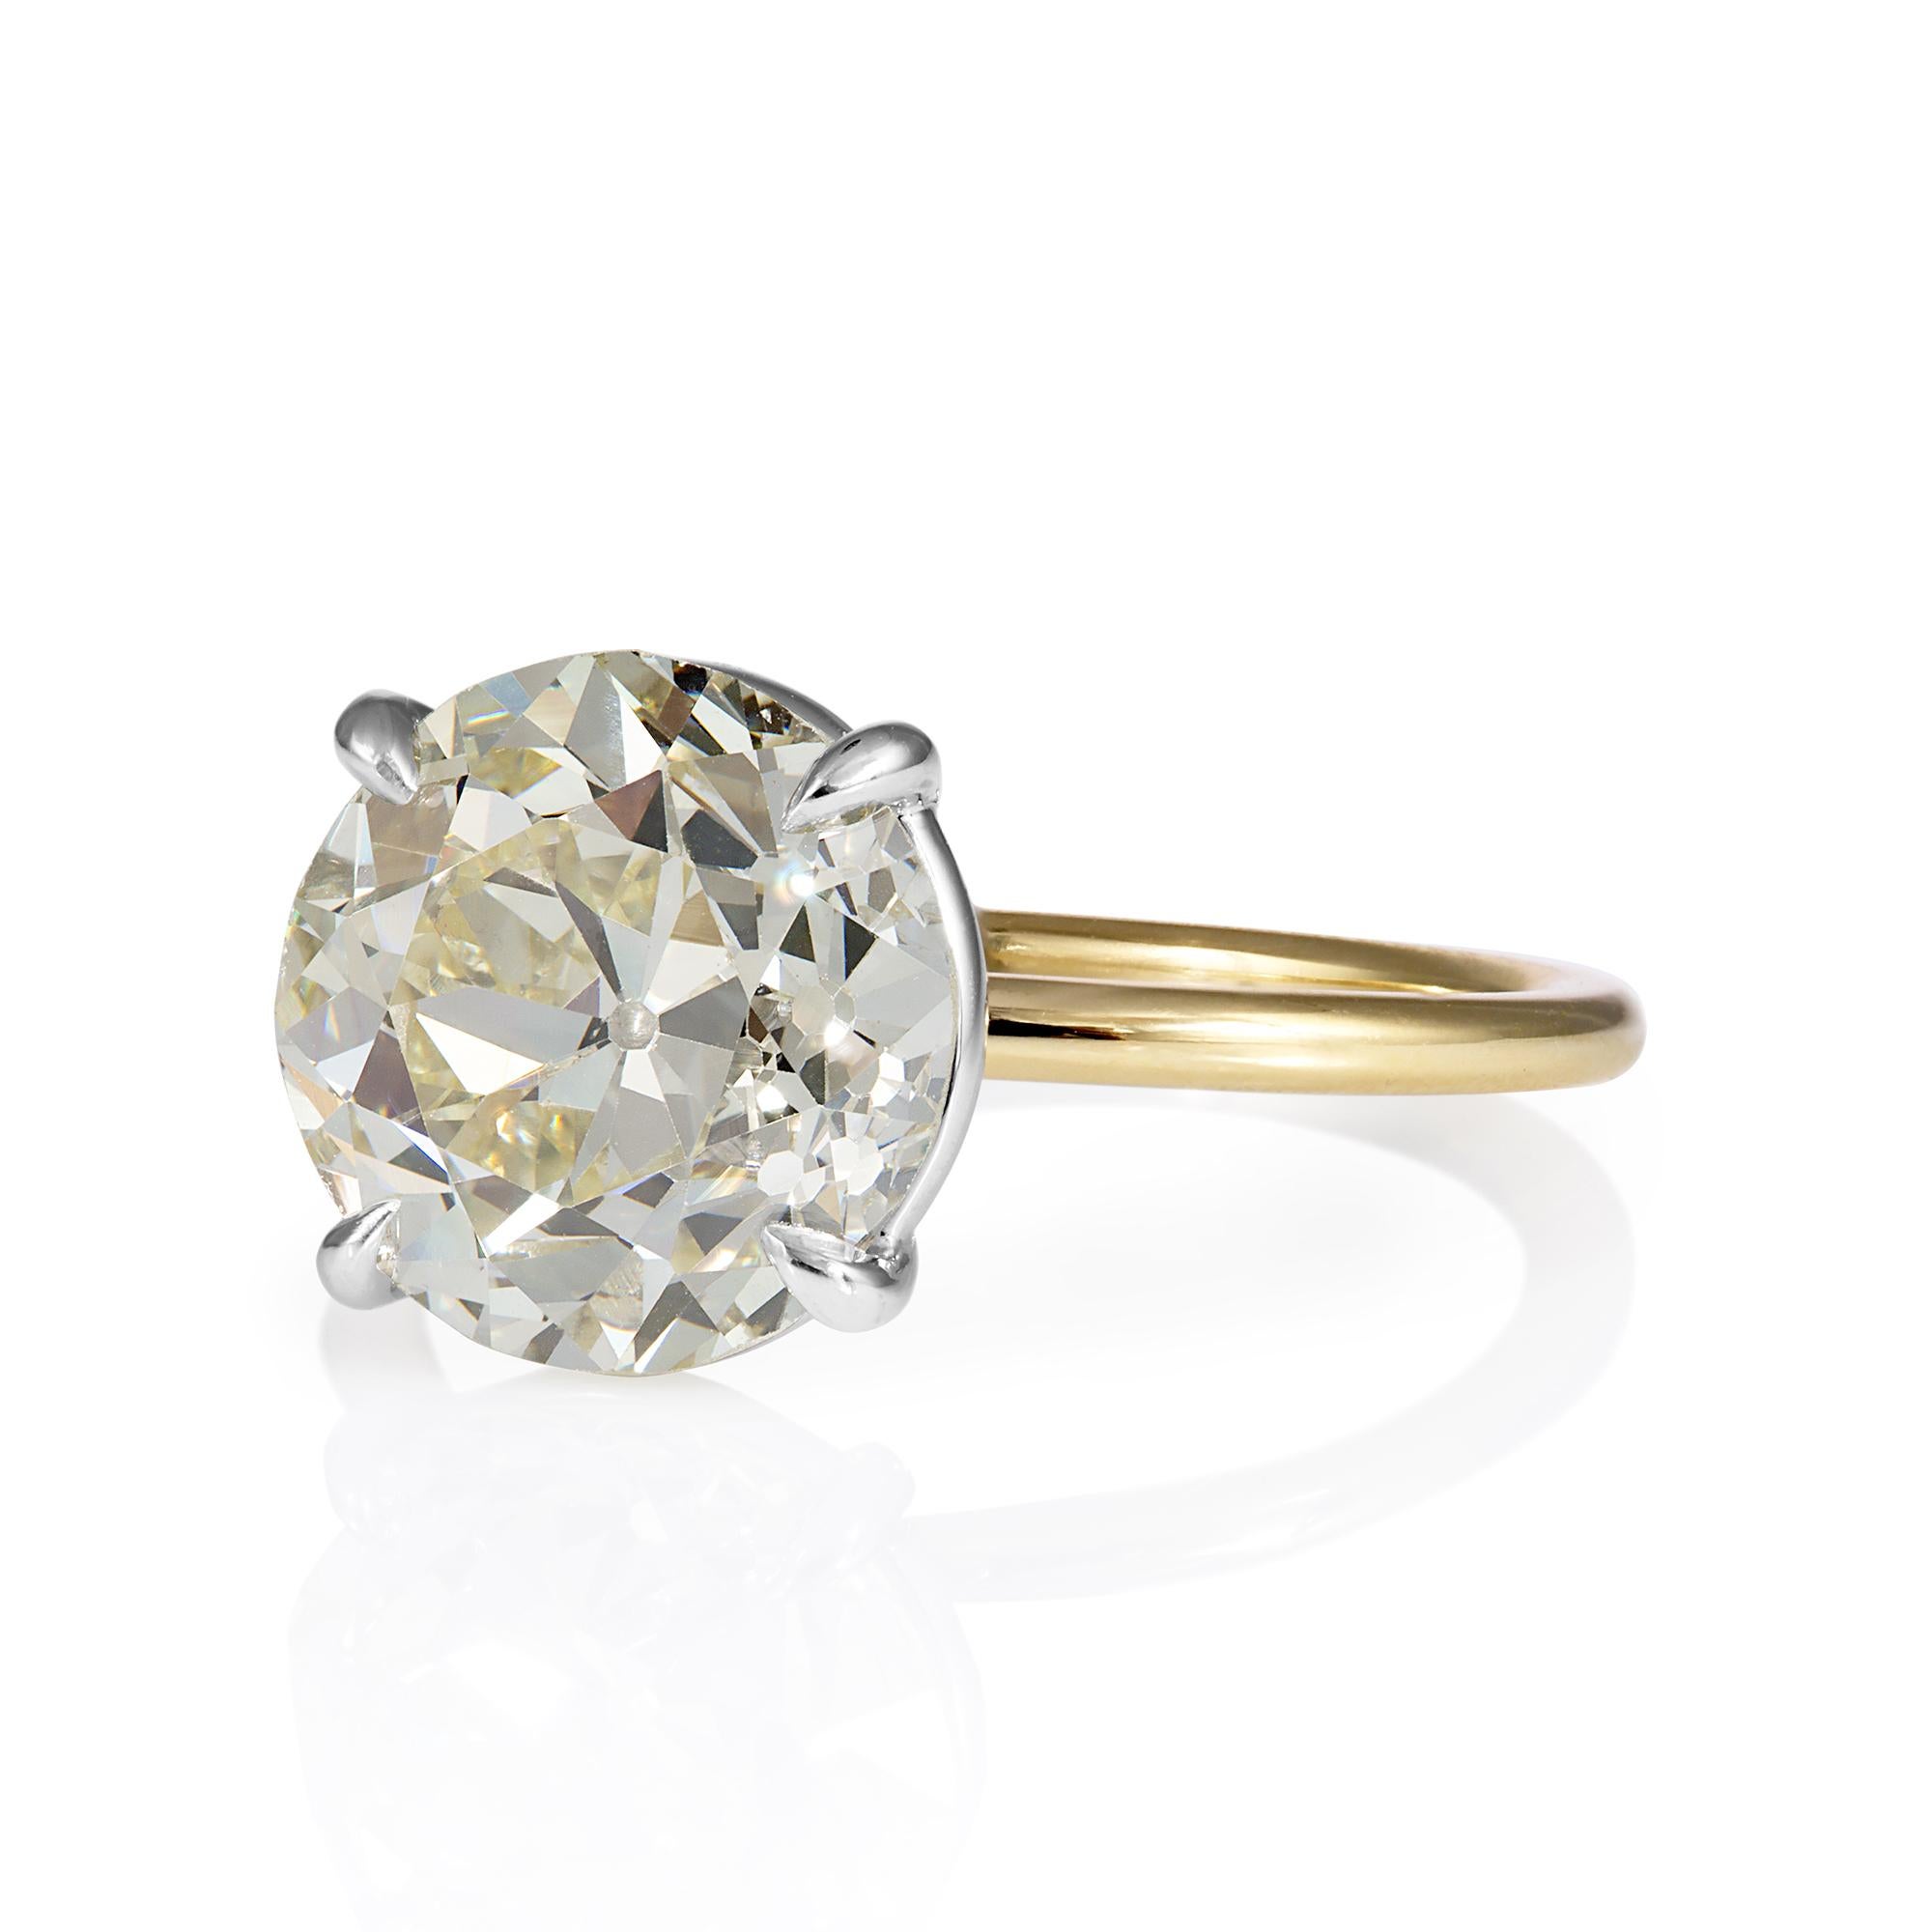 Vintage GIA 4.57ct Antique Old Mine Diamond Solitaire Engagement 18k Platinum Ring

This exquisite ring elegantly combines feminine and simplicity design. SHOWSTOPPER truly Beautiful Timeless Diamond Solitaire Ring will take your breath away! You'll